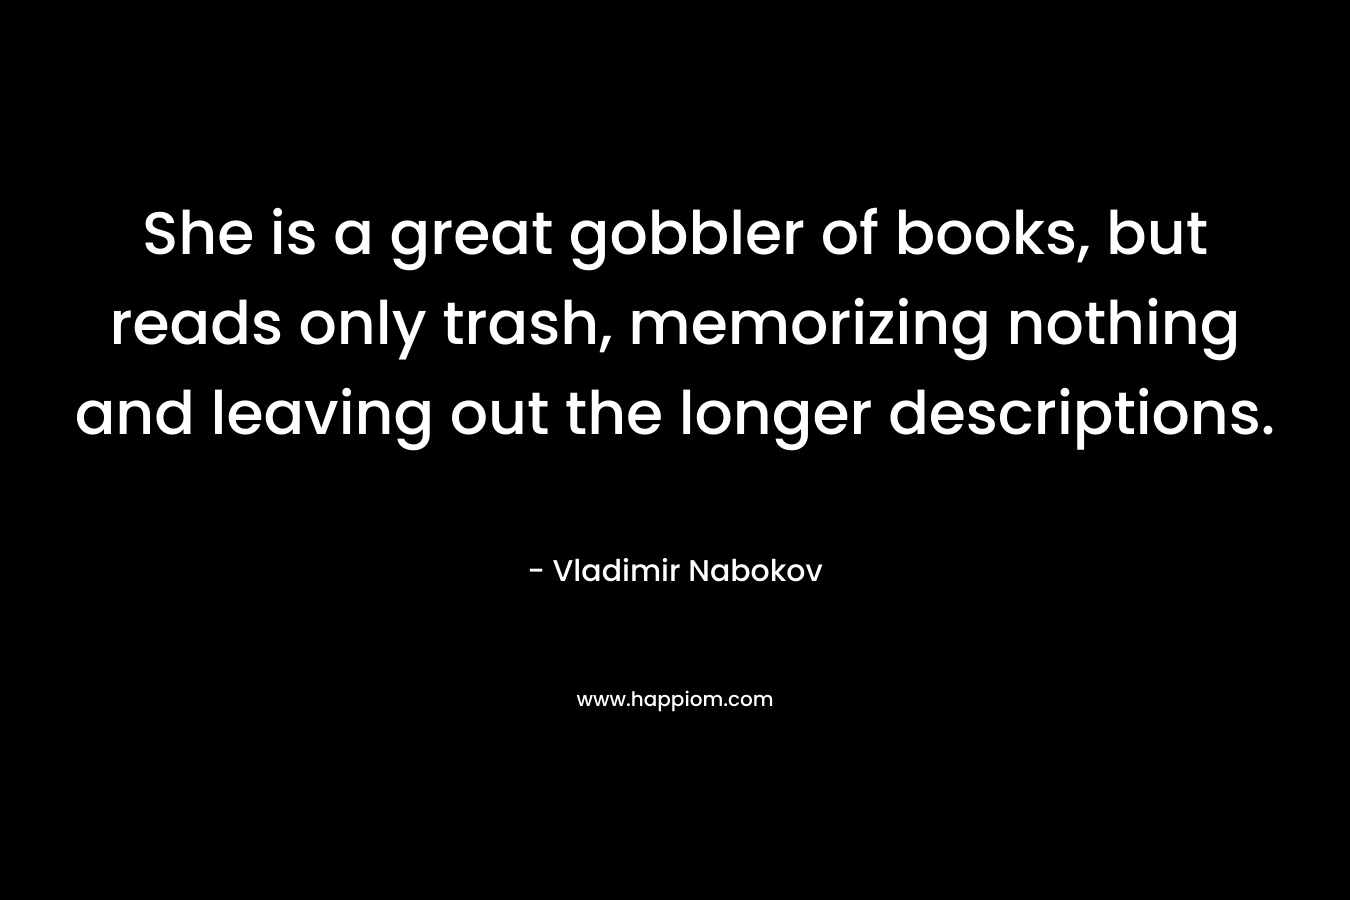 She is a great gobbler of books, but reads only trash, memorizing nothing and leaving out the longer descriptions. – Vladimir Nabokov